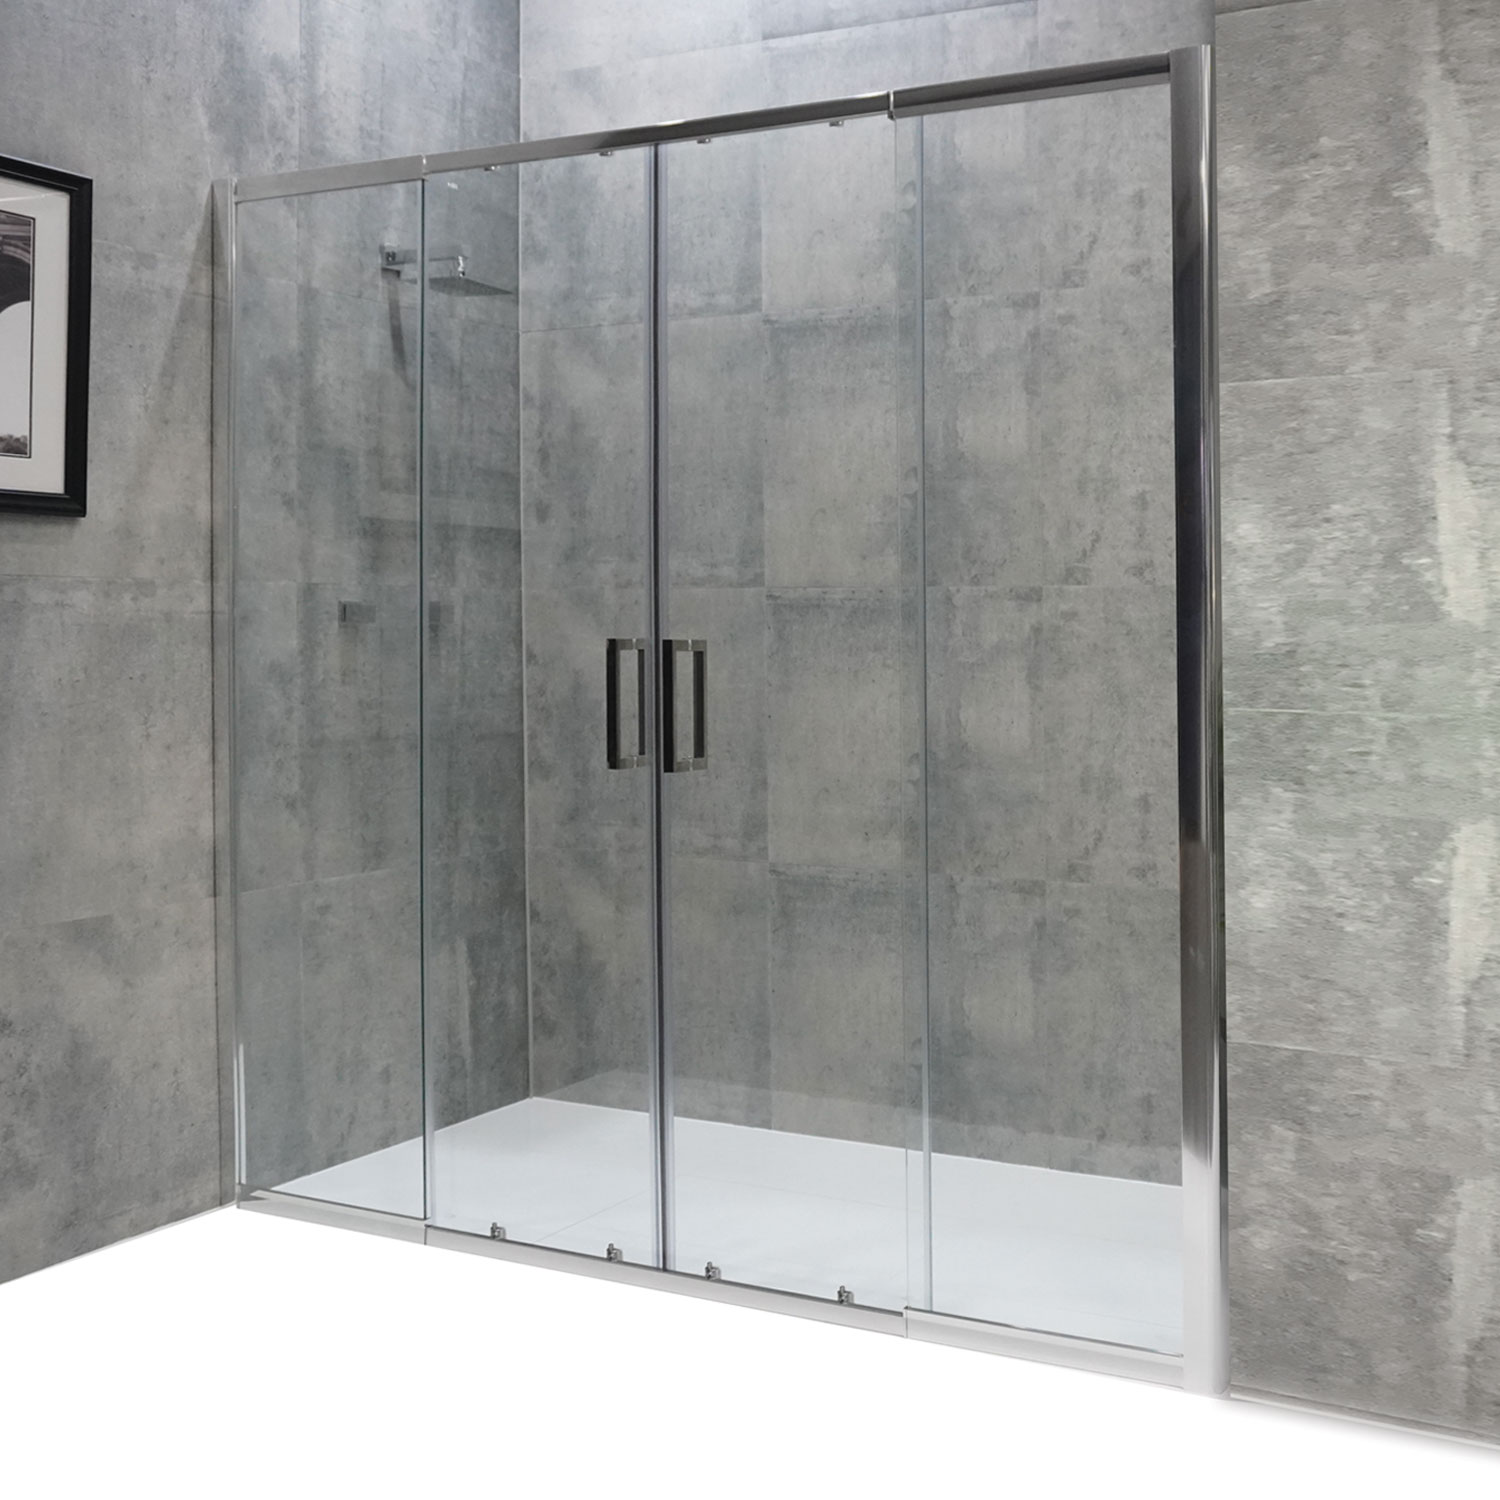 Avanti Double Sliding Doors Shower Screen Height 1950mm with 100mm Adjustable width from 1200mm to 1300mm (Polished Anodised)